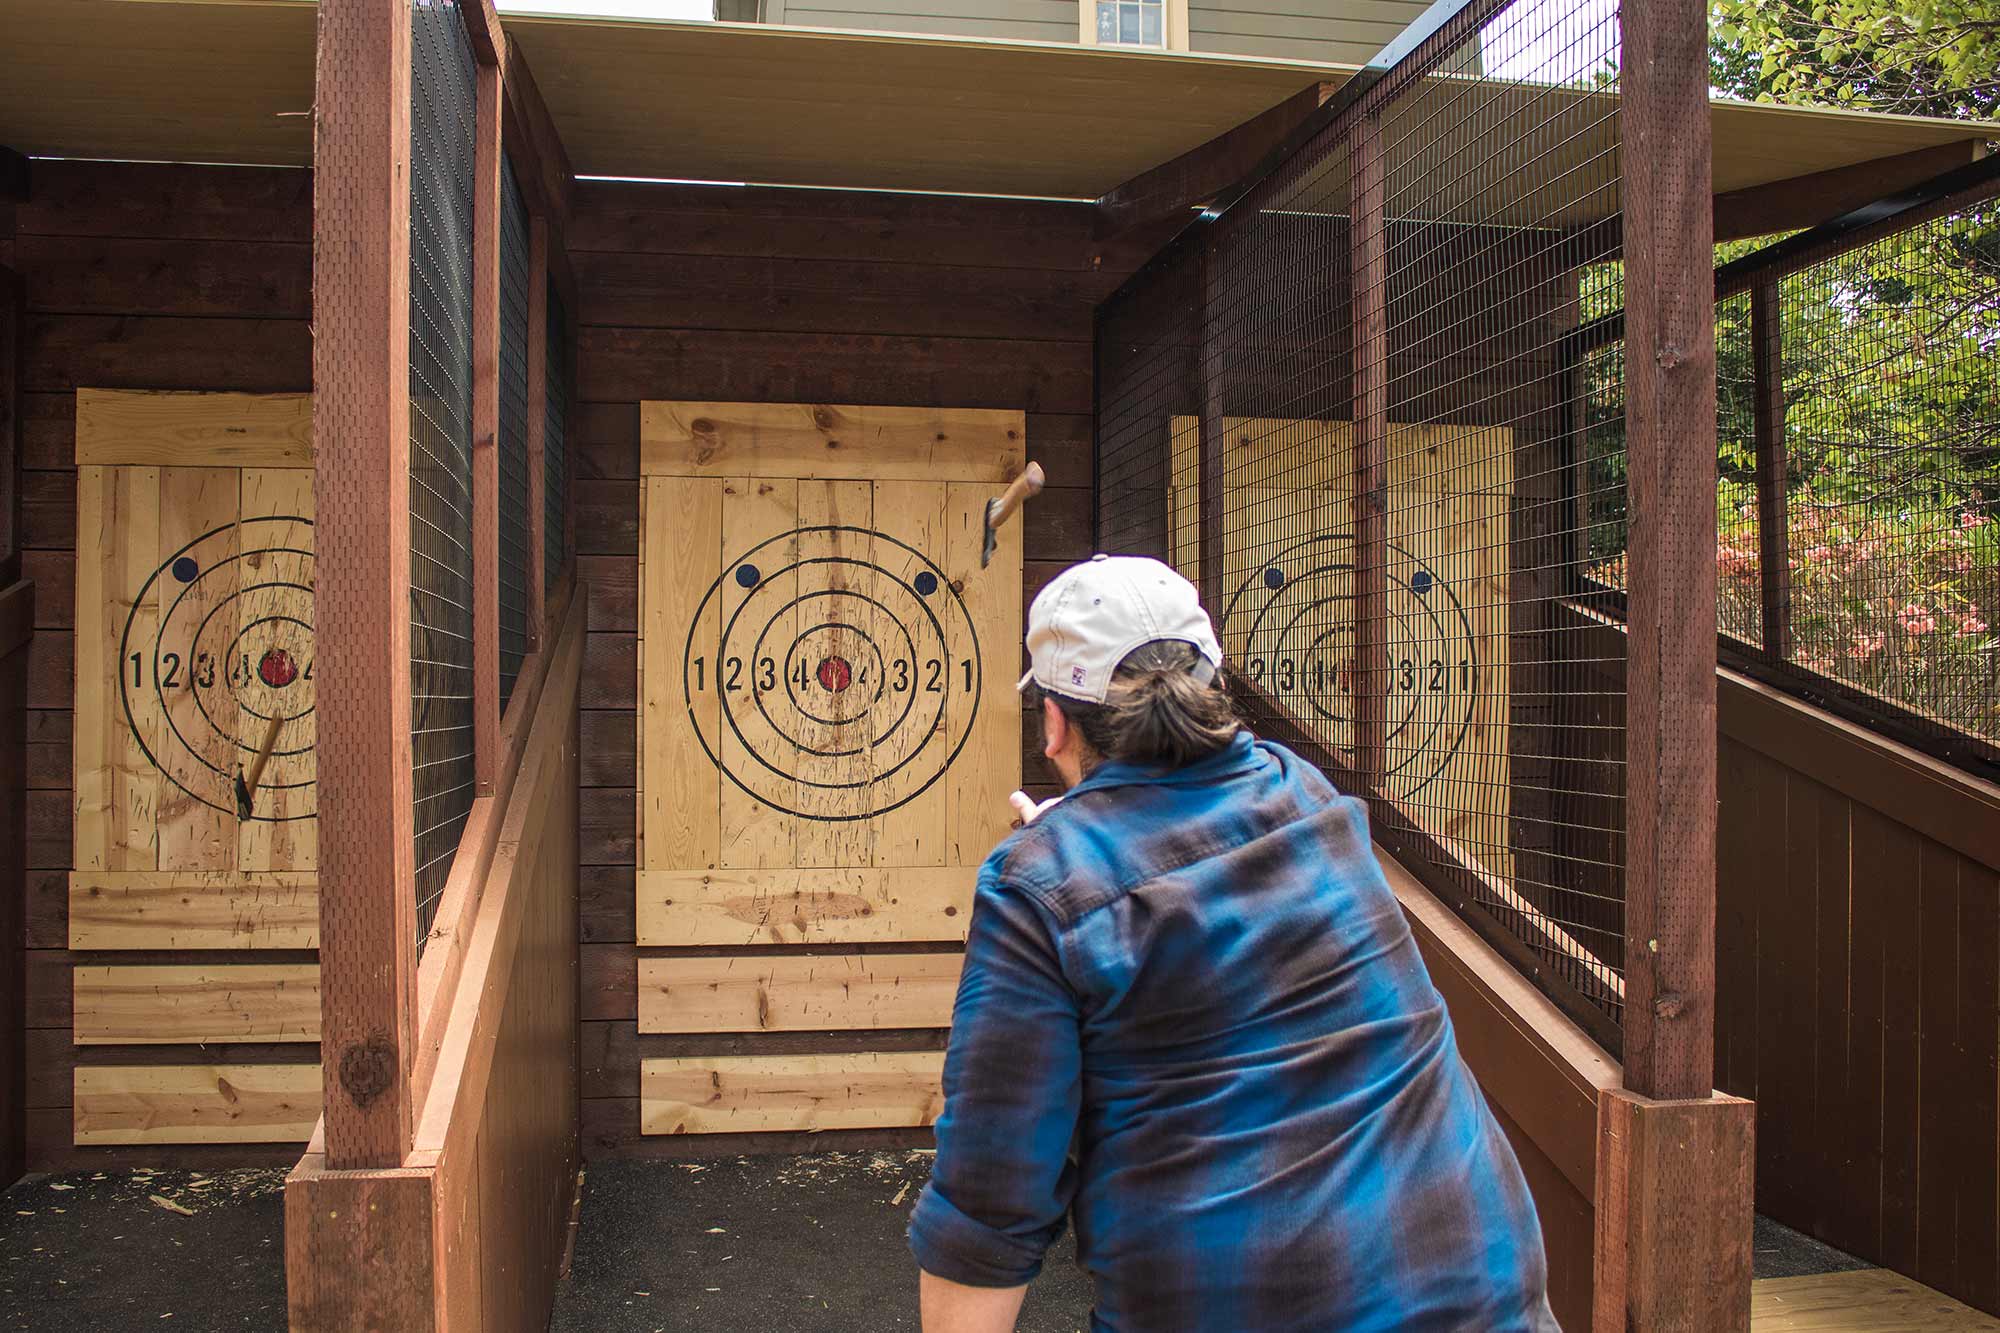 A guest throwing an axe at the target at the winchester mystery house